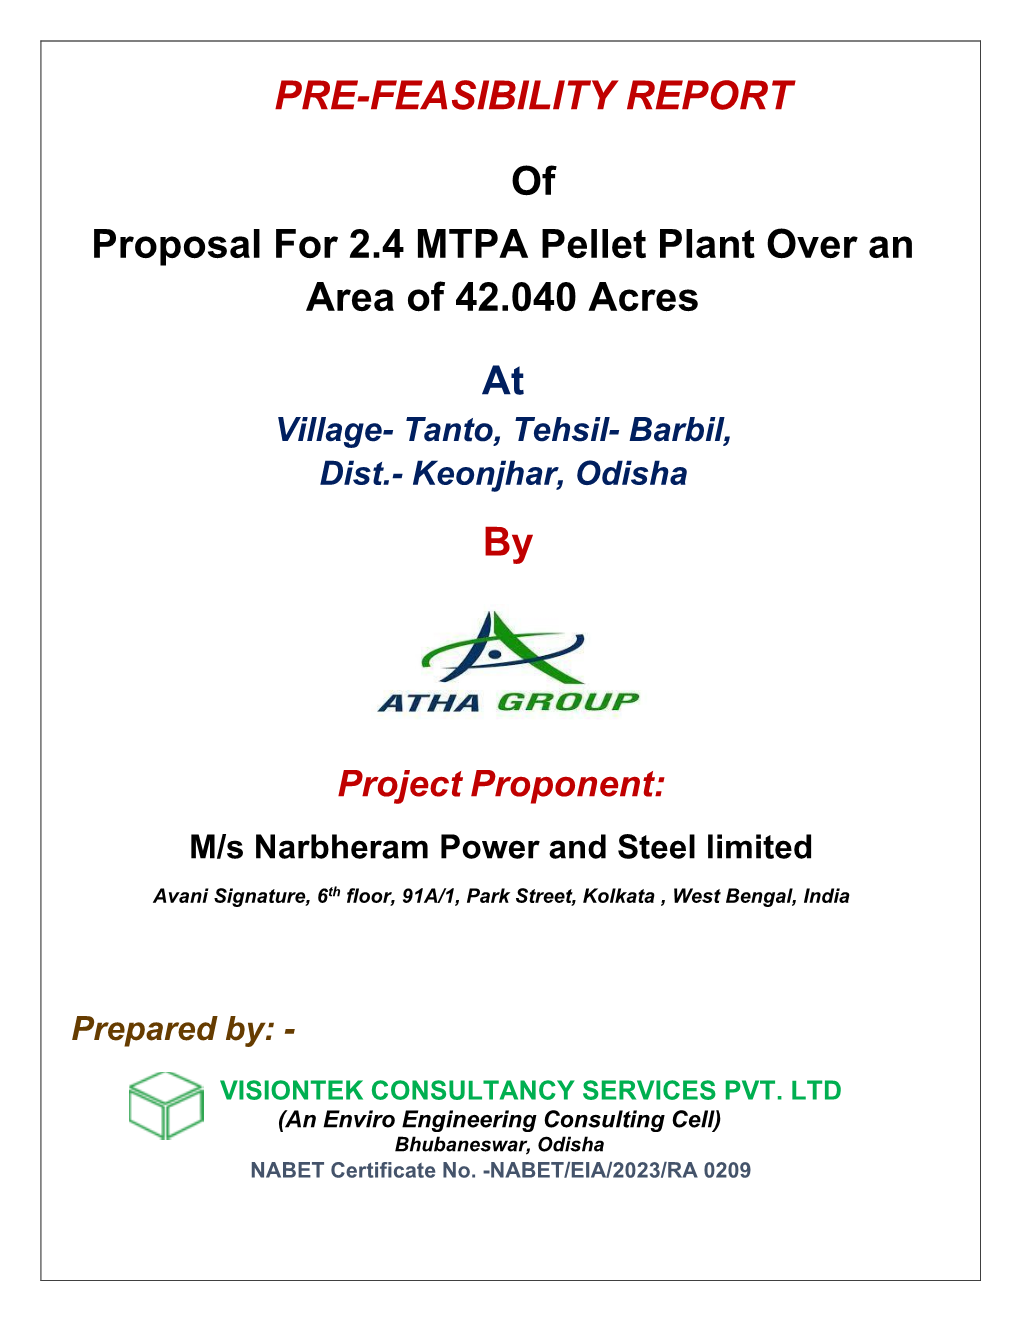 PRE-FEASIBILITY REPORT of Proposal for 2.4 MTPA Pellet Plant